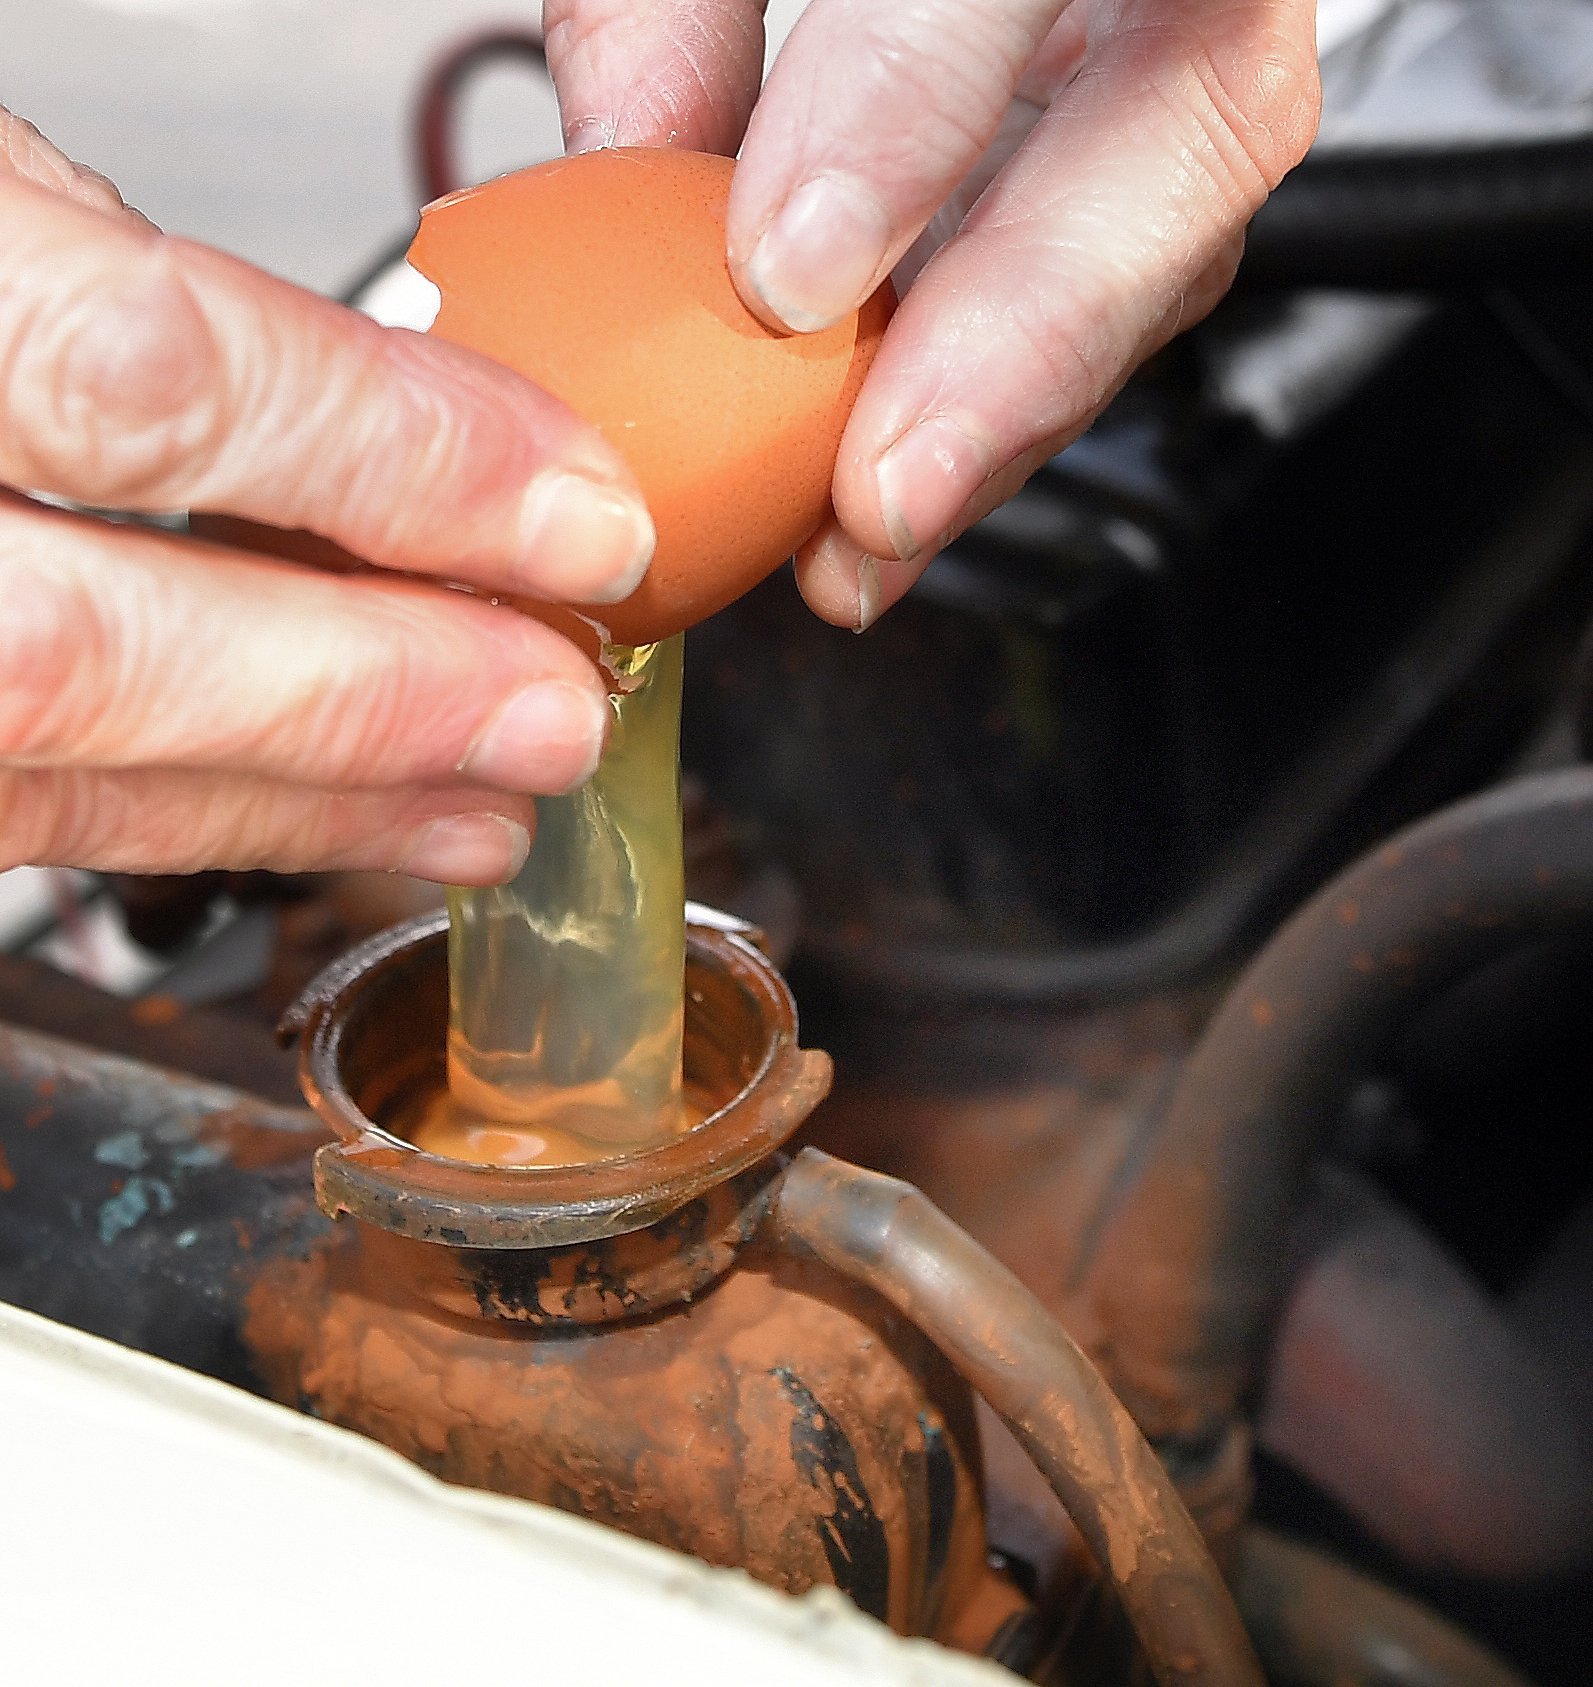 A raw egg, yoke and all, poured into ODAILY’s radiator.